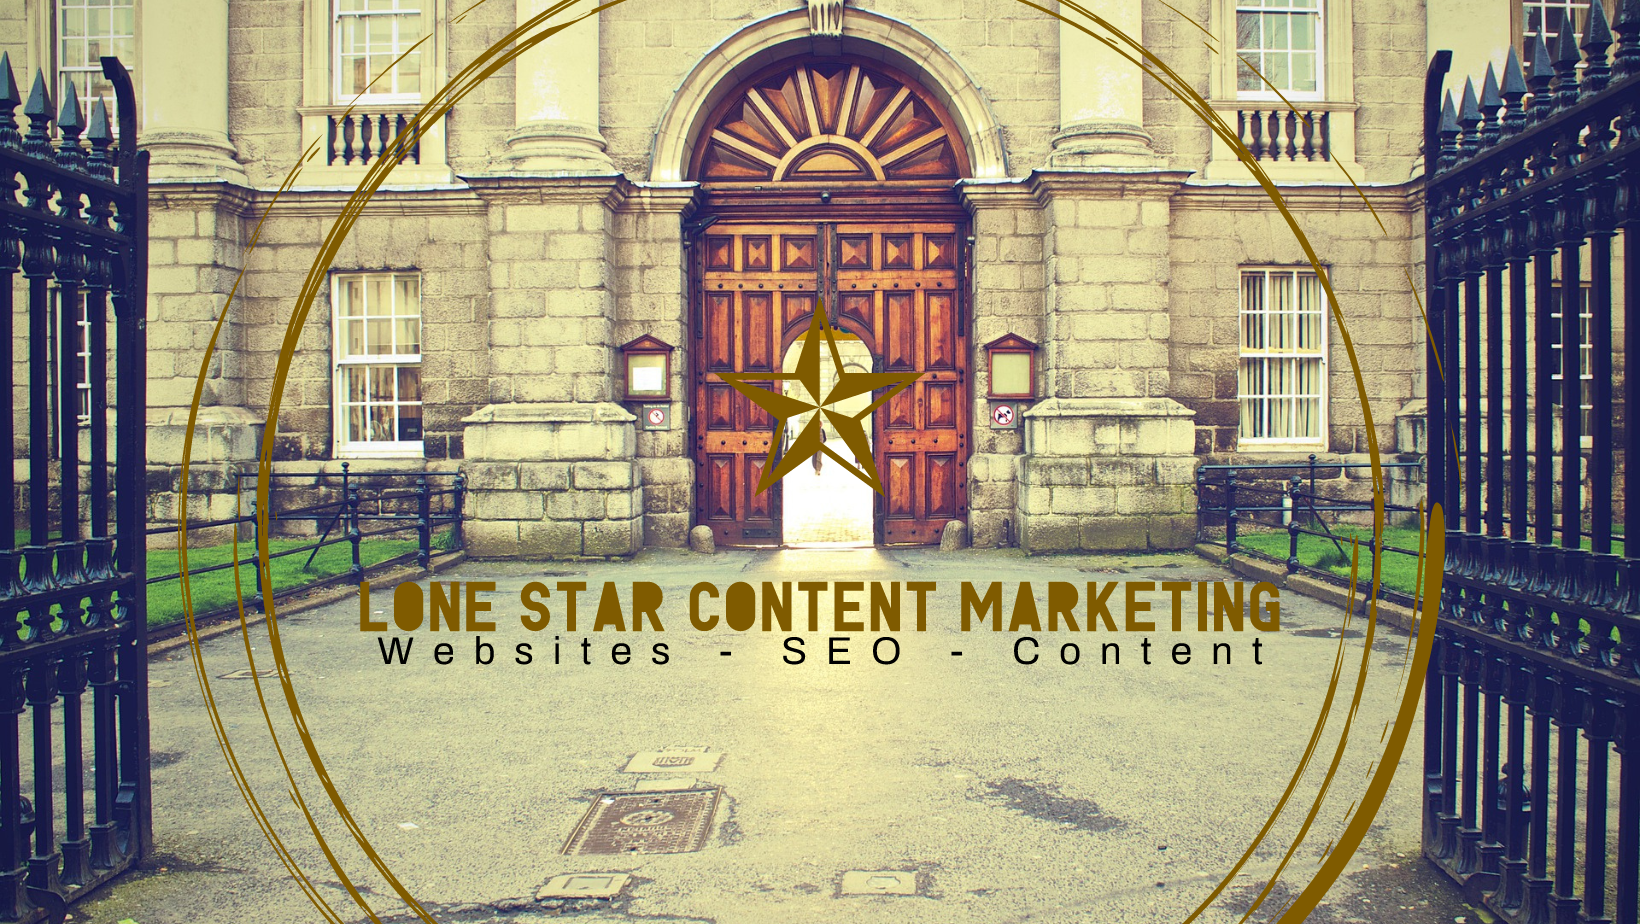 Use Lone Star Content Marketing for Texas Law Firm and Attorney Marketing